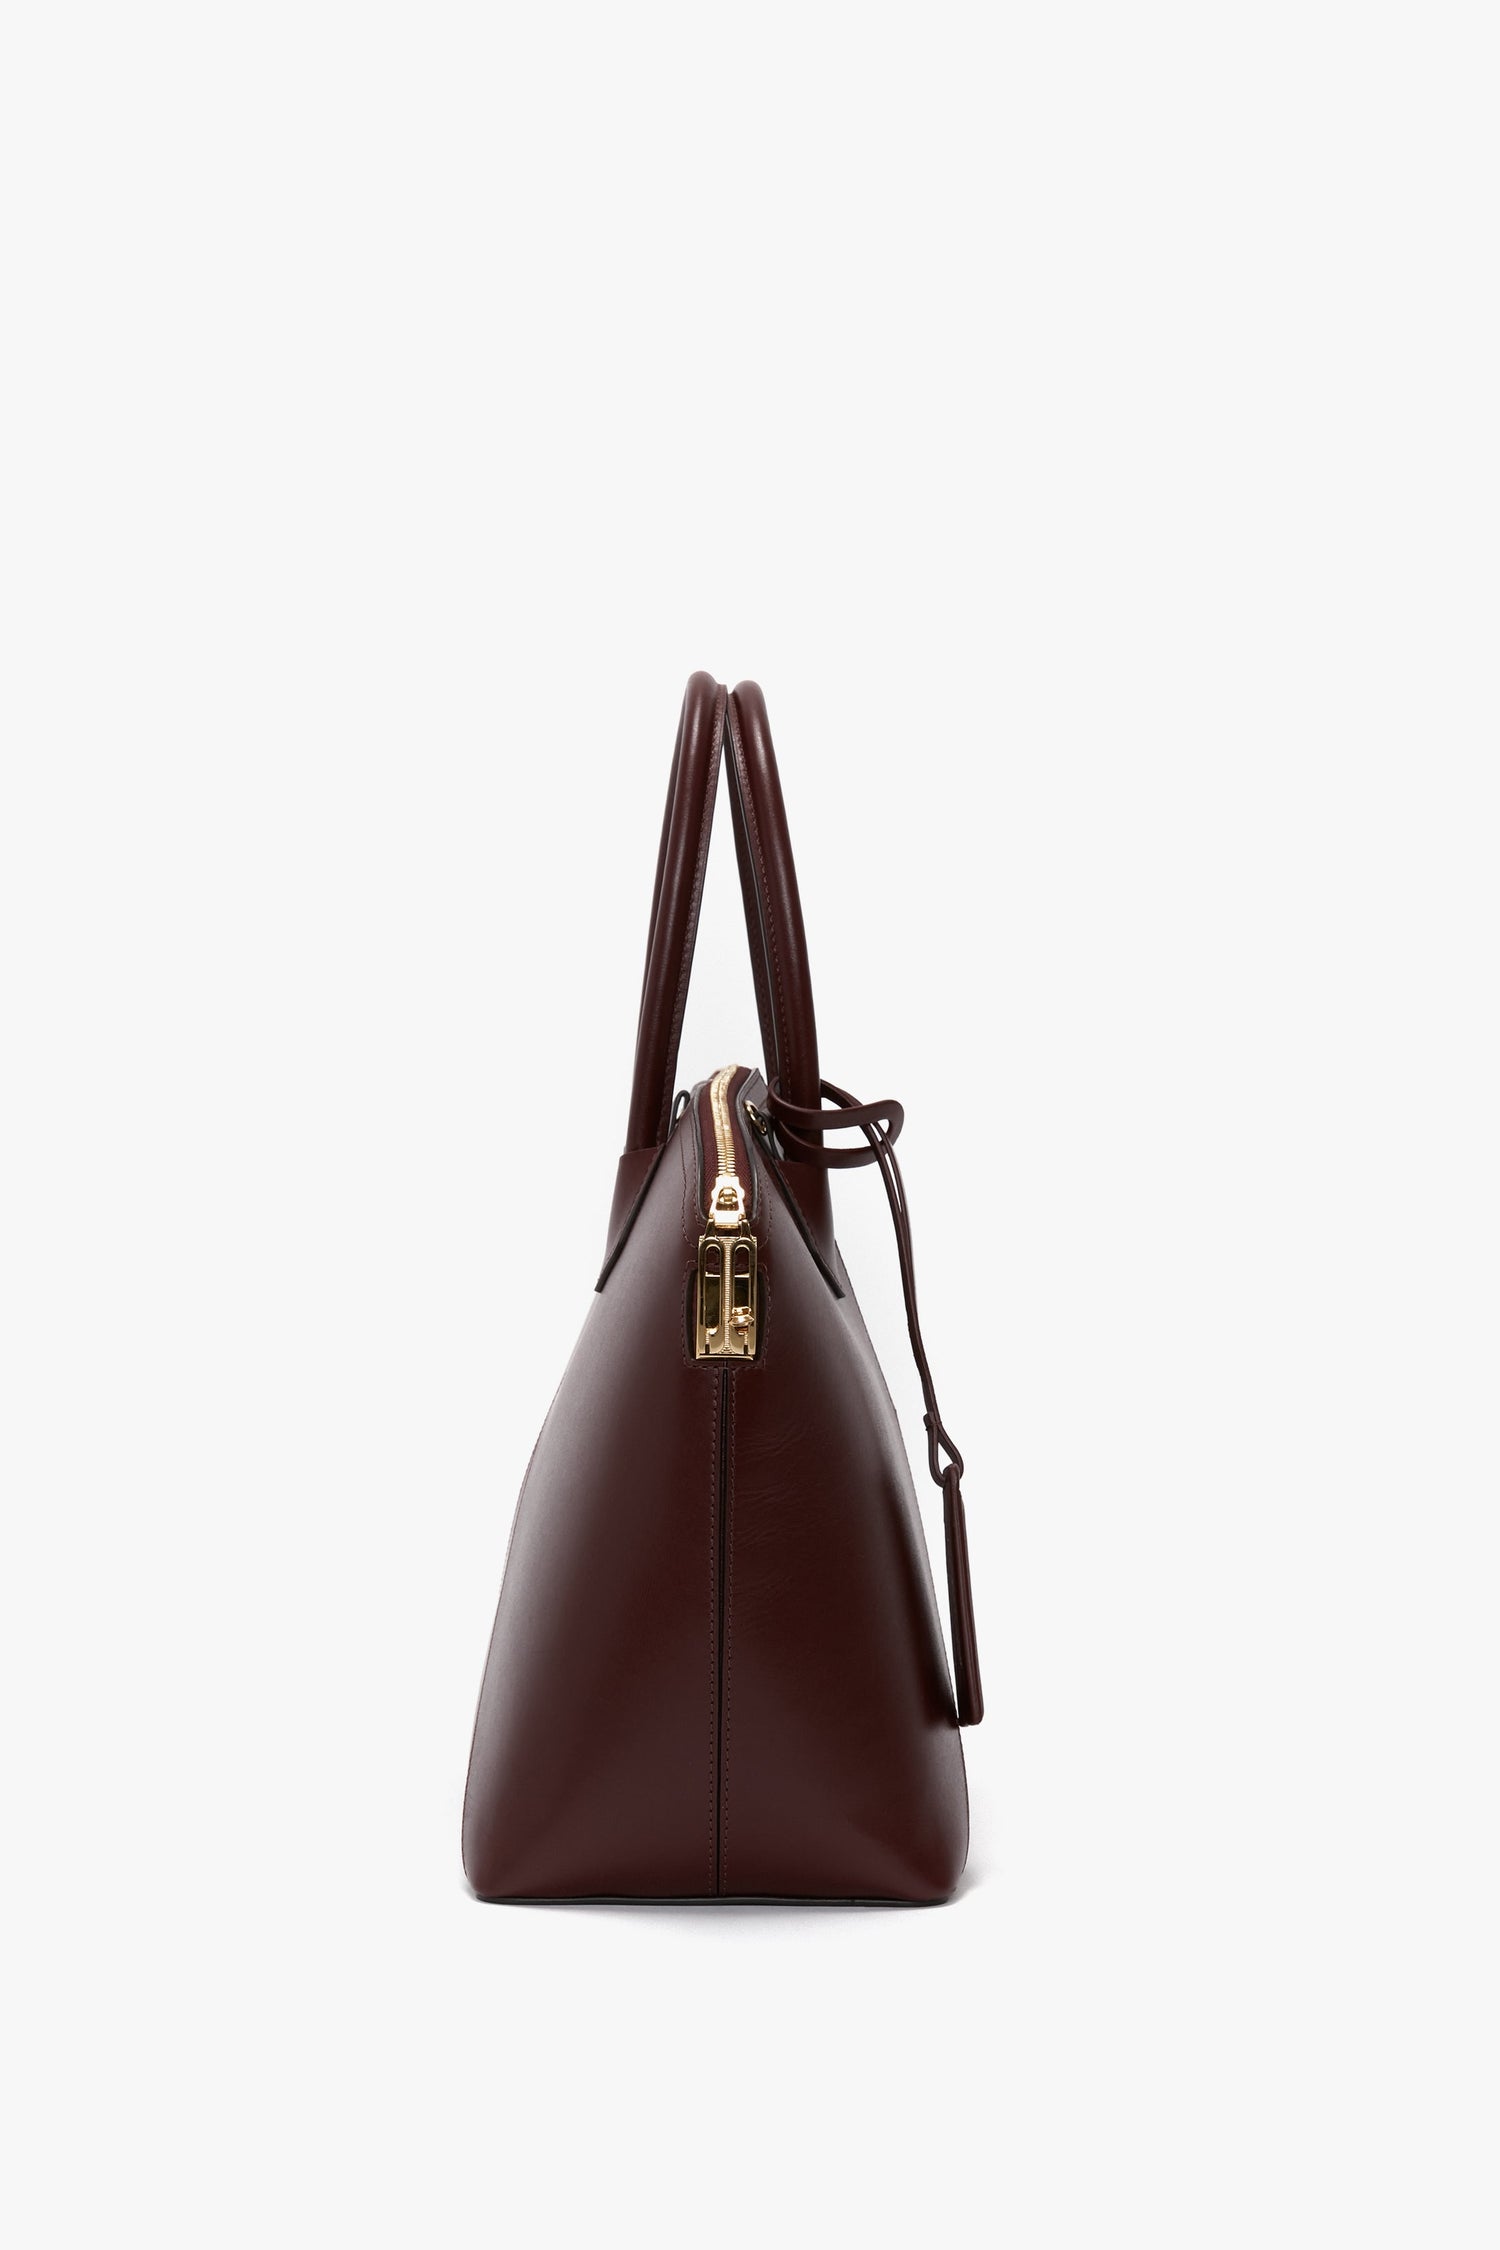 Side view of a Victoria Beckham Victoria Bag In Burgundy Leather with gold hardware and a chic padlock closure.